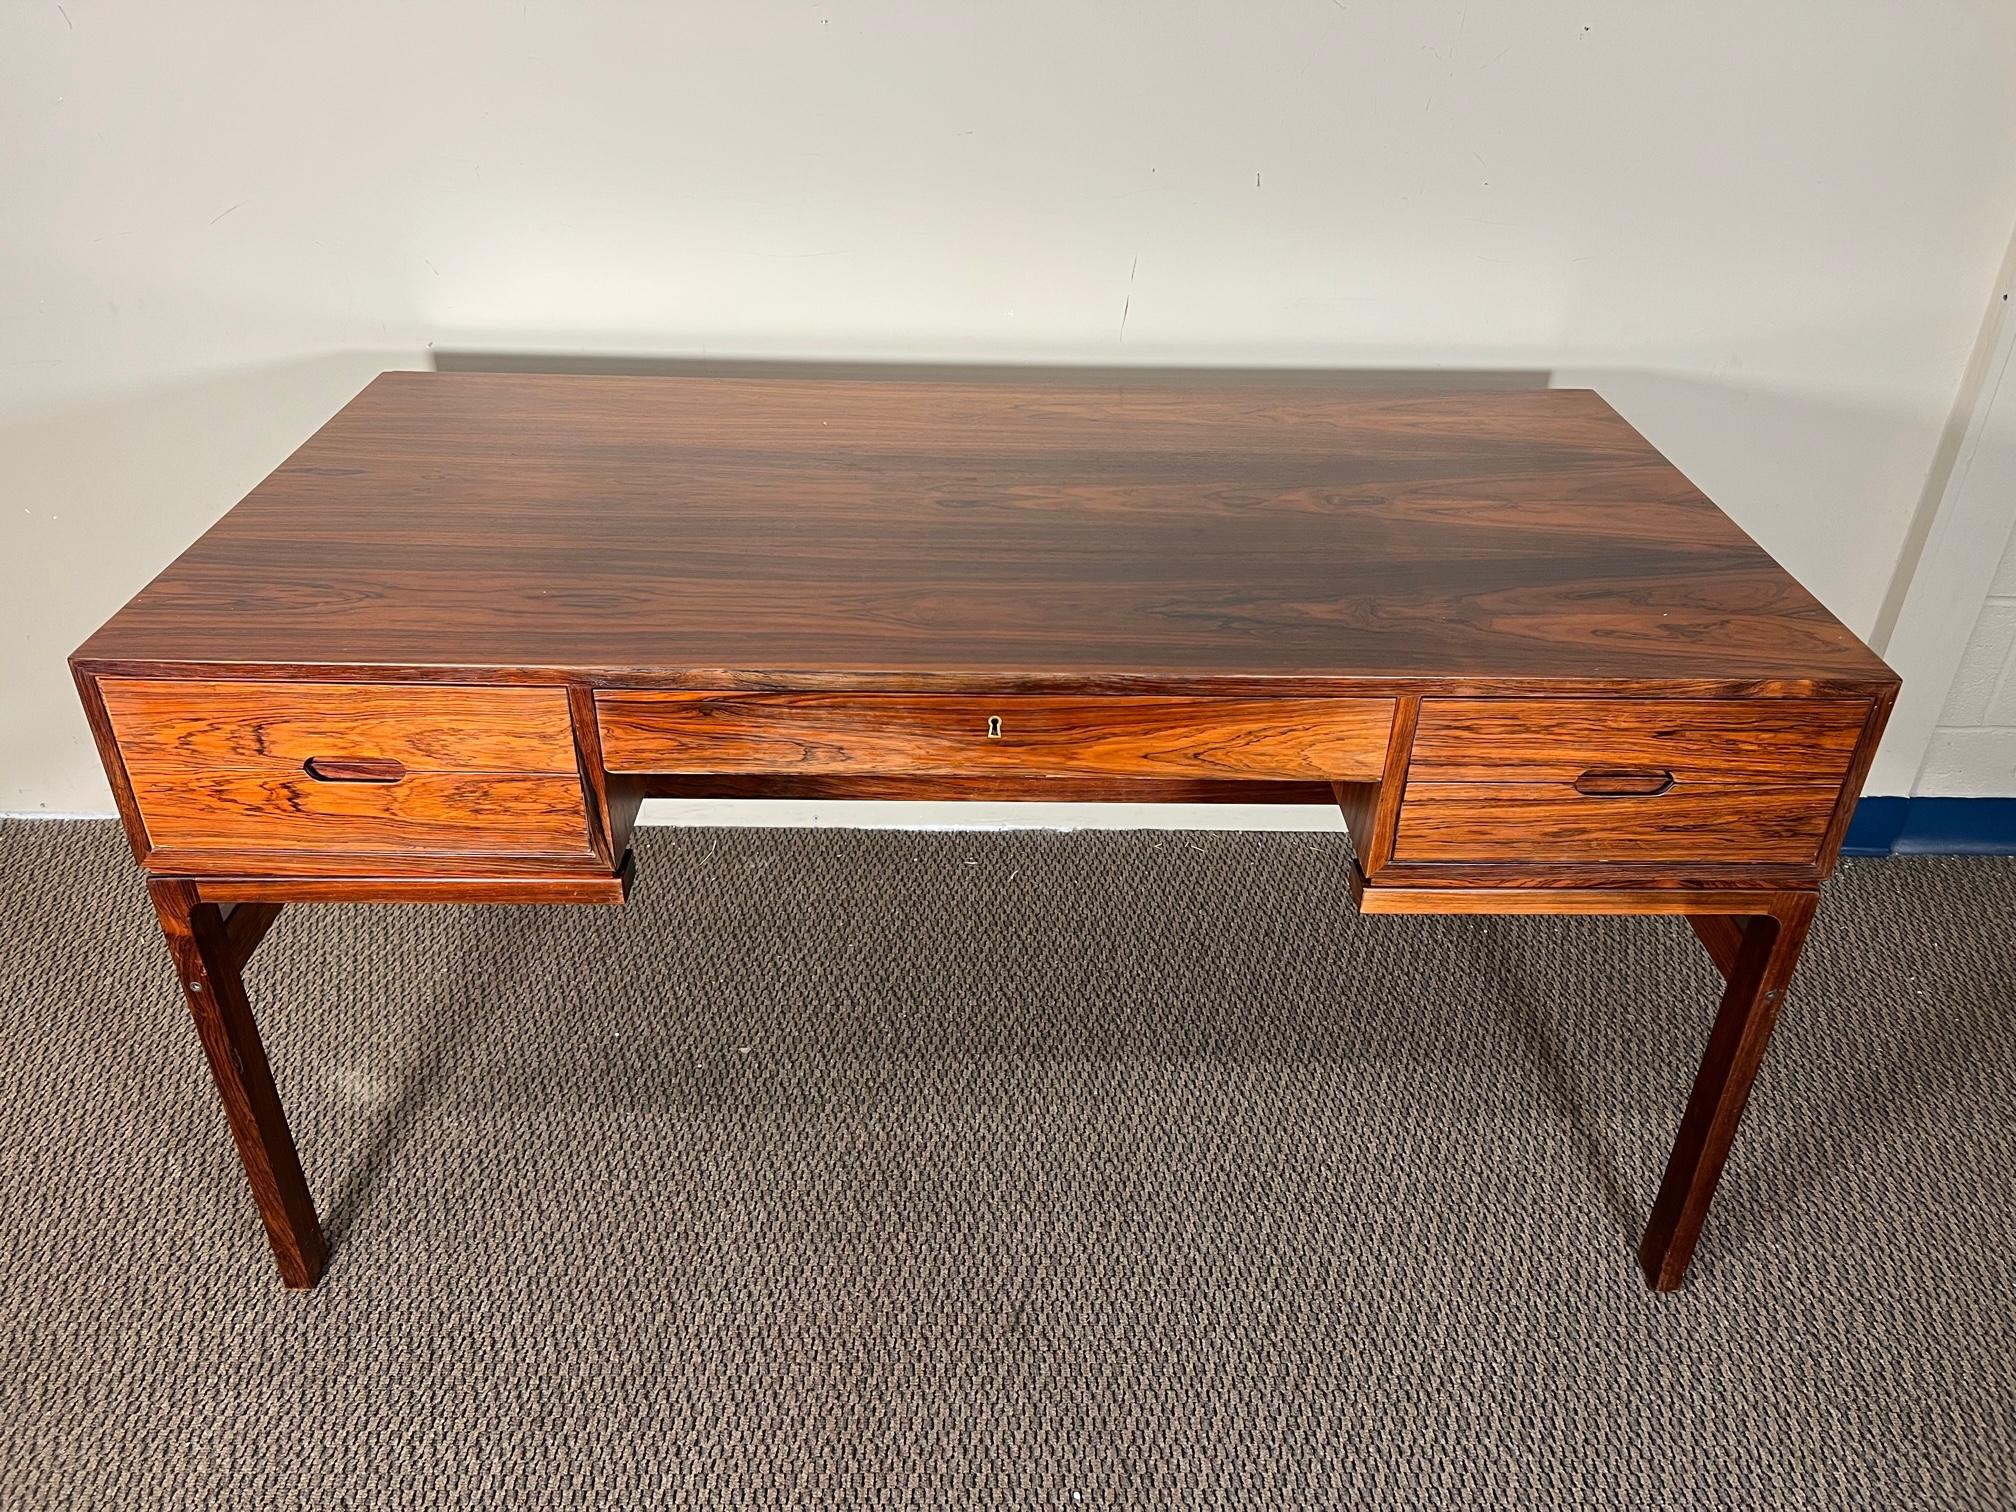 Fantastic midcentury rosewood desk. Designed by Arne Wahl Iversen. Free standing with bookcase at the back.
Fantastic condition overall. Some fading and loss of finish. Scratches on the top. Veneer chip at the back left corner.

Dimensions: